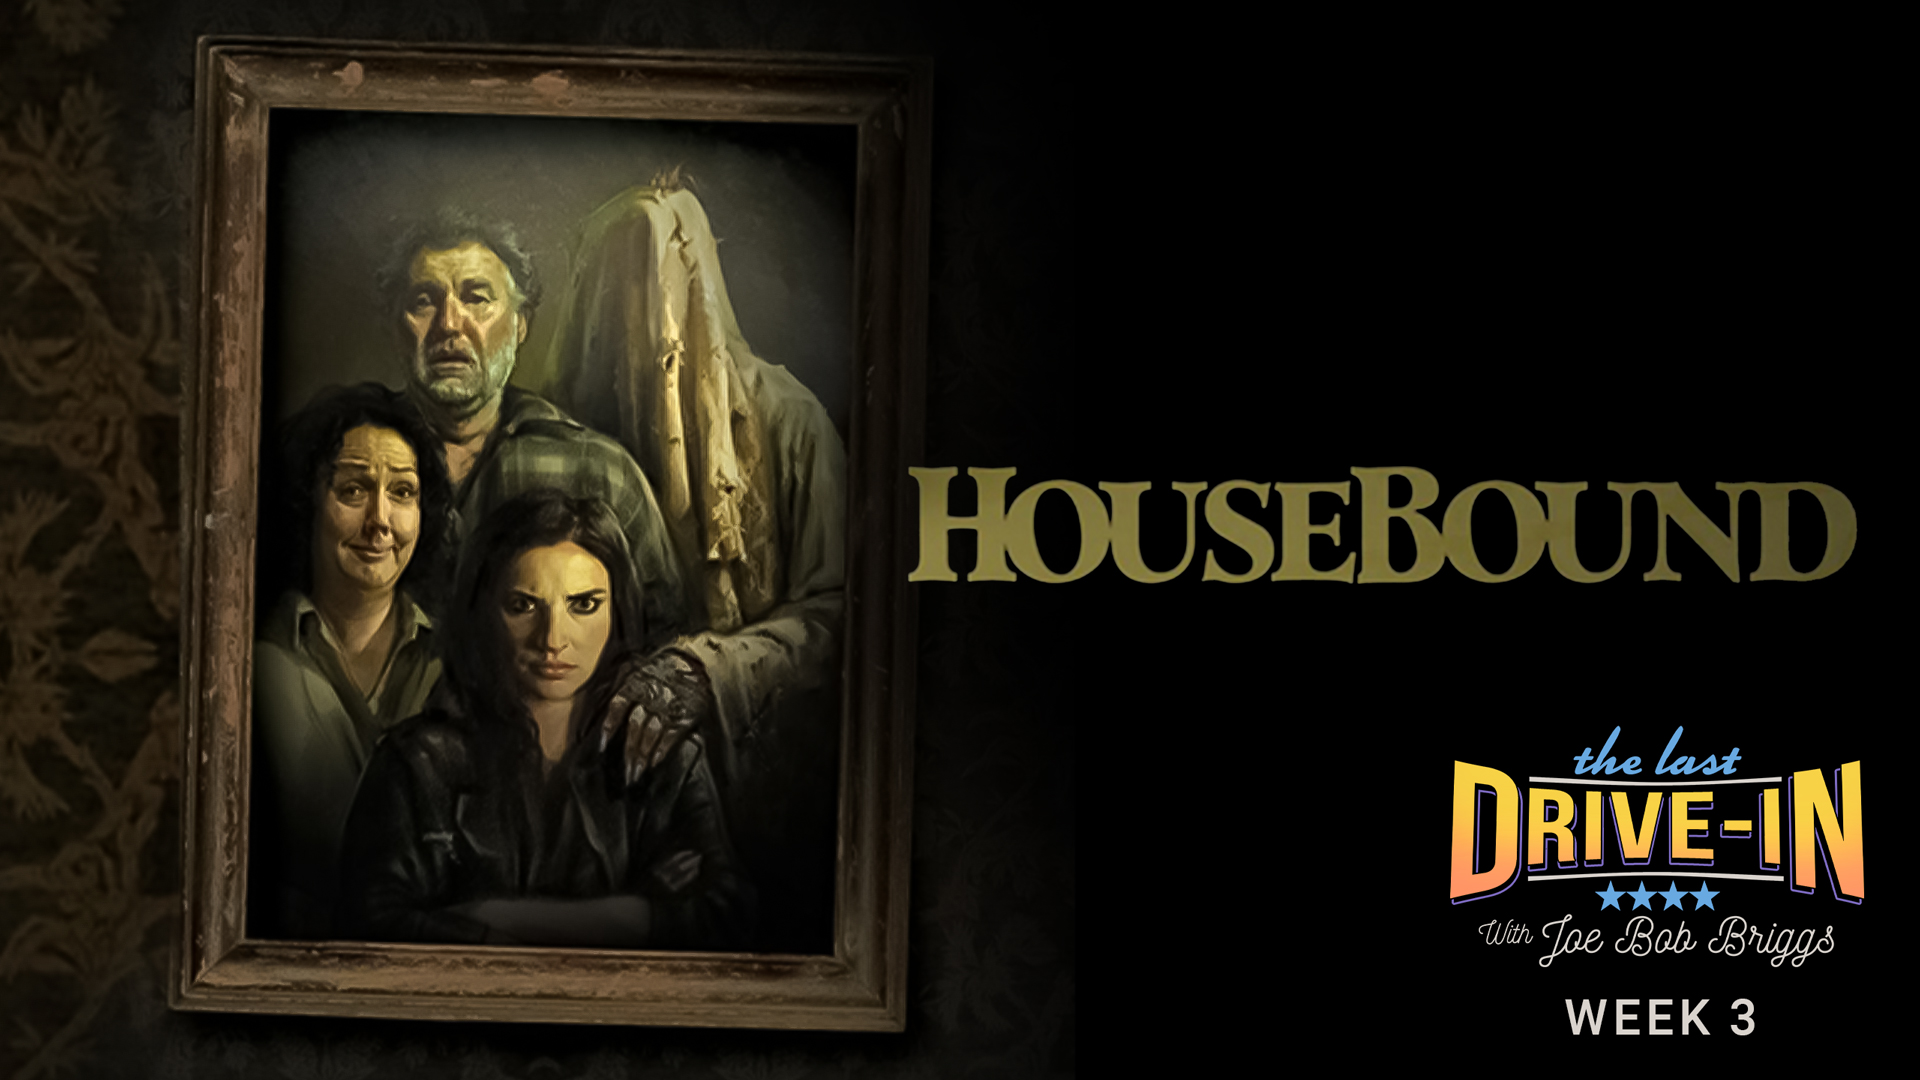 Housebound, Placed in home detention, Kylie Bucknel is convinced her mother's home is haunted., TV-MA, Season 1053667, Episode 6